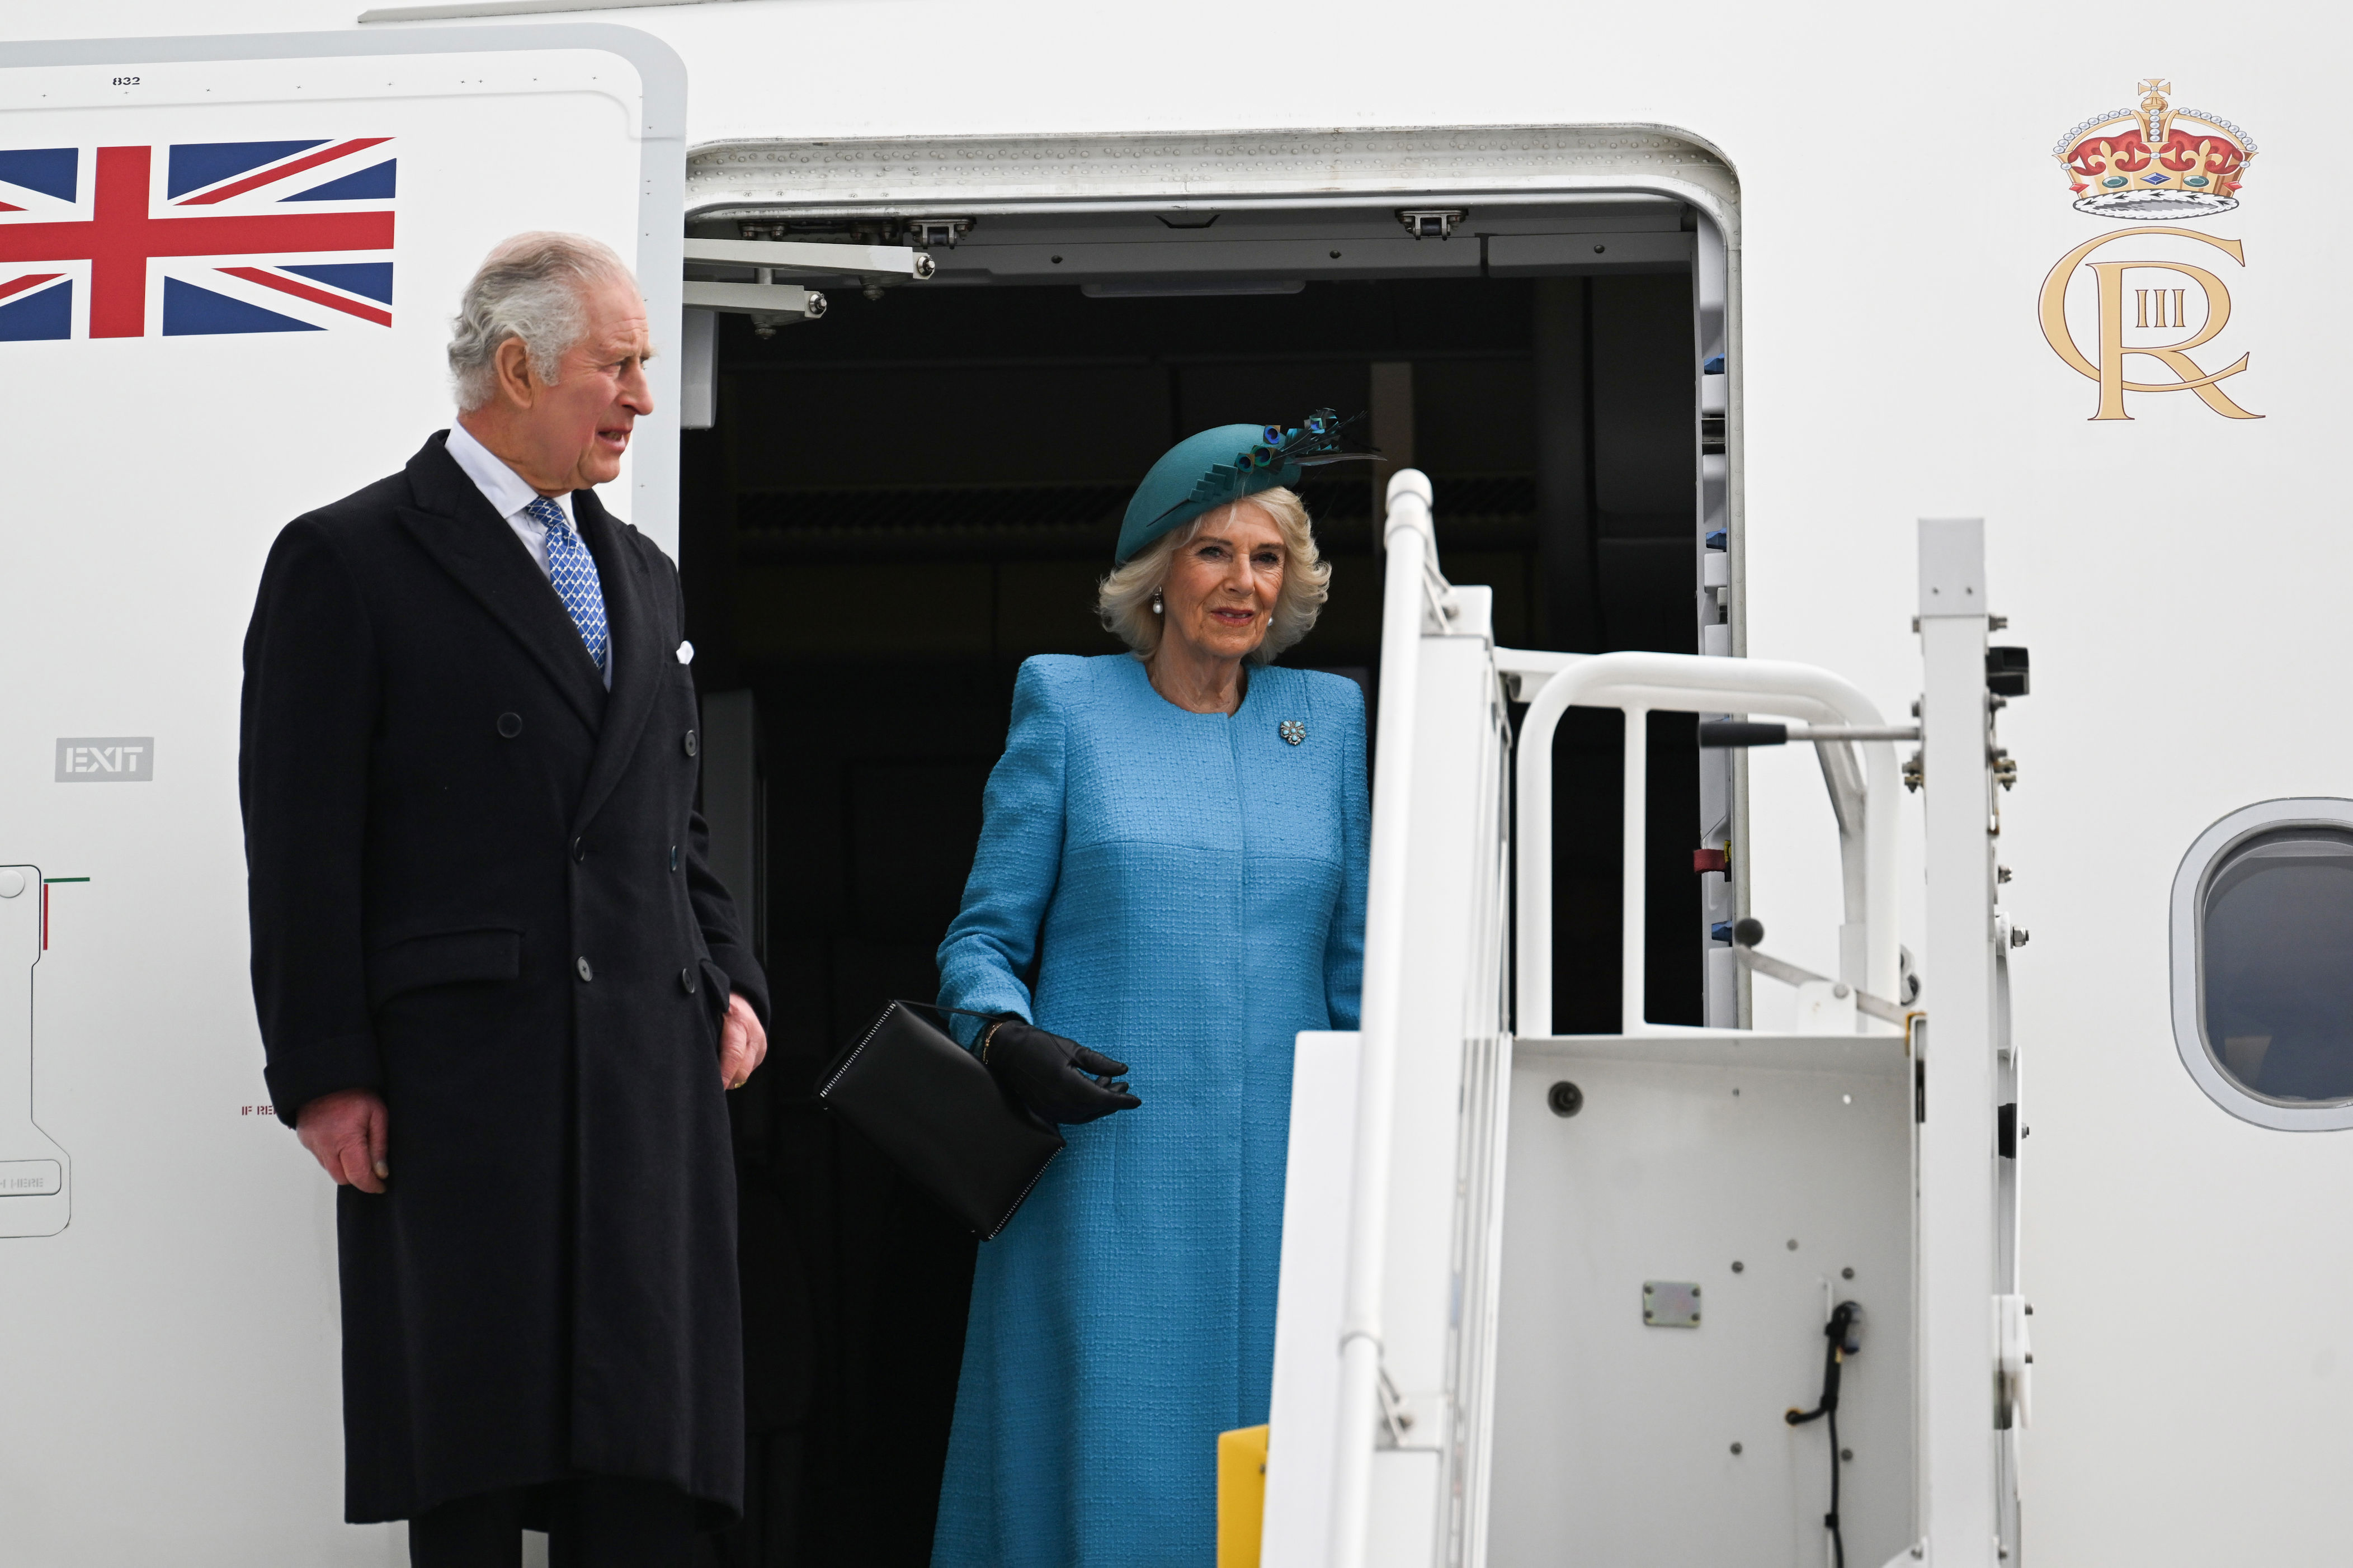 <p>King Charles III and Queen Consort Camilla arrived at Berlin Brandenburg Airport on March 29, 2023, to begin <a href="https://www.wonderwall.com/celebrity/king-charles-iii-and-queen-consort-camilla-the-best-photos-from-their-state-visit-to-germany-720122.gallery">an official state visit to Germany </a>-- the first international state visit of his reign as king. There, they were greeted by a 21-gun salute and a fly-past.</p>